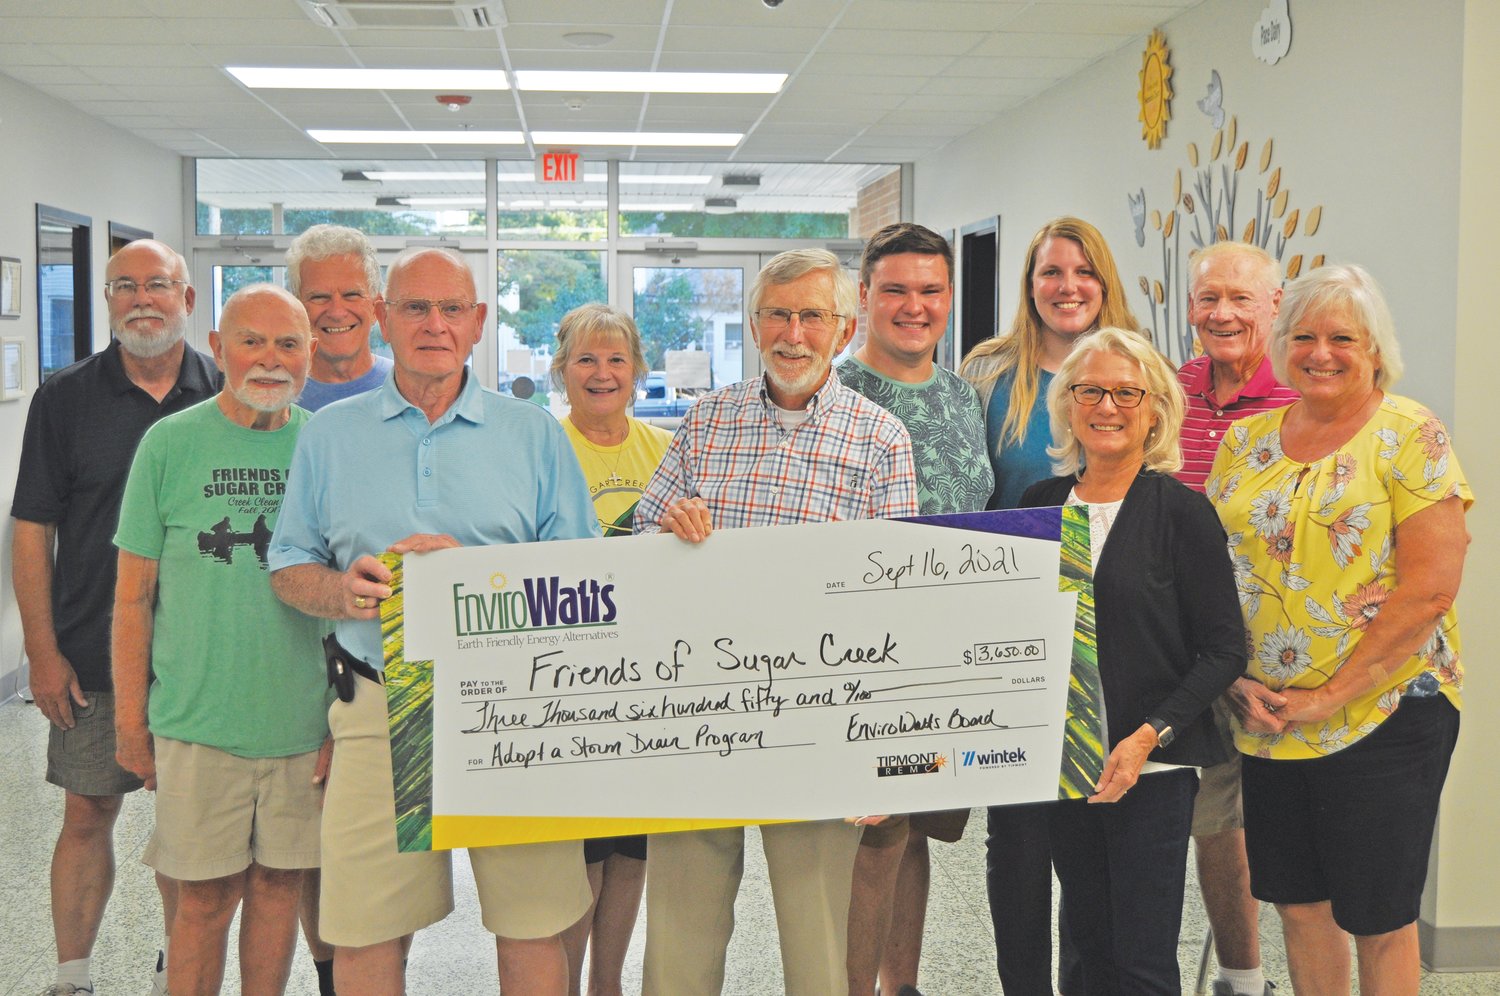 Friends of Sugar Creek members accept a grant from the Tipmont REMC EnviroWatts program to support promotion of the Adopt-A-Drain program on Thursday.